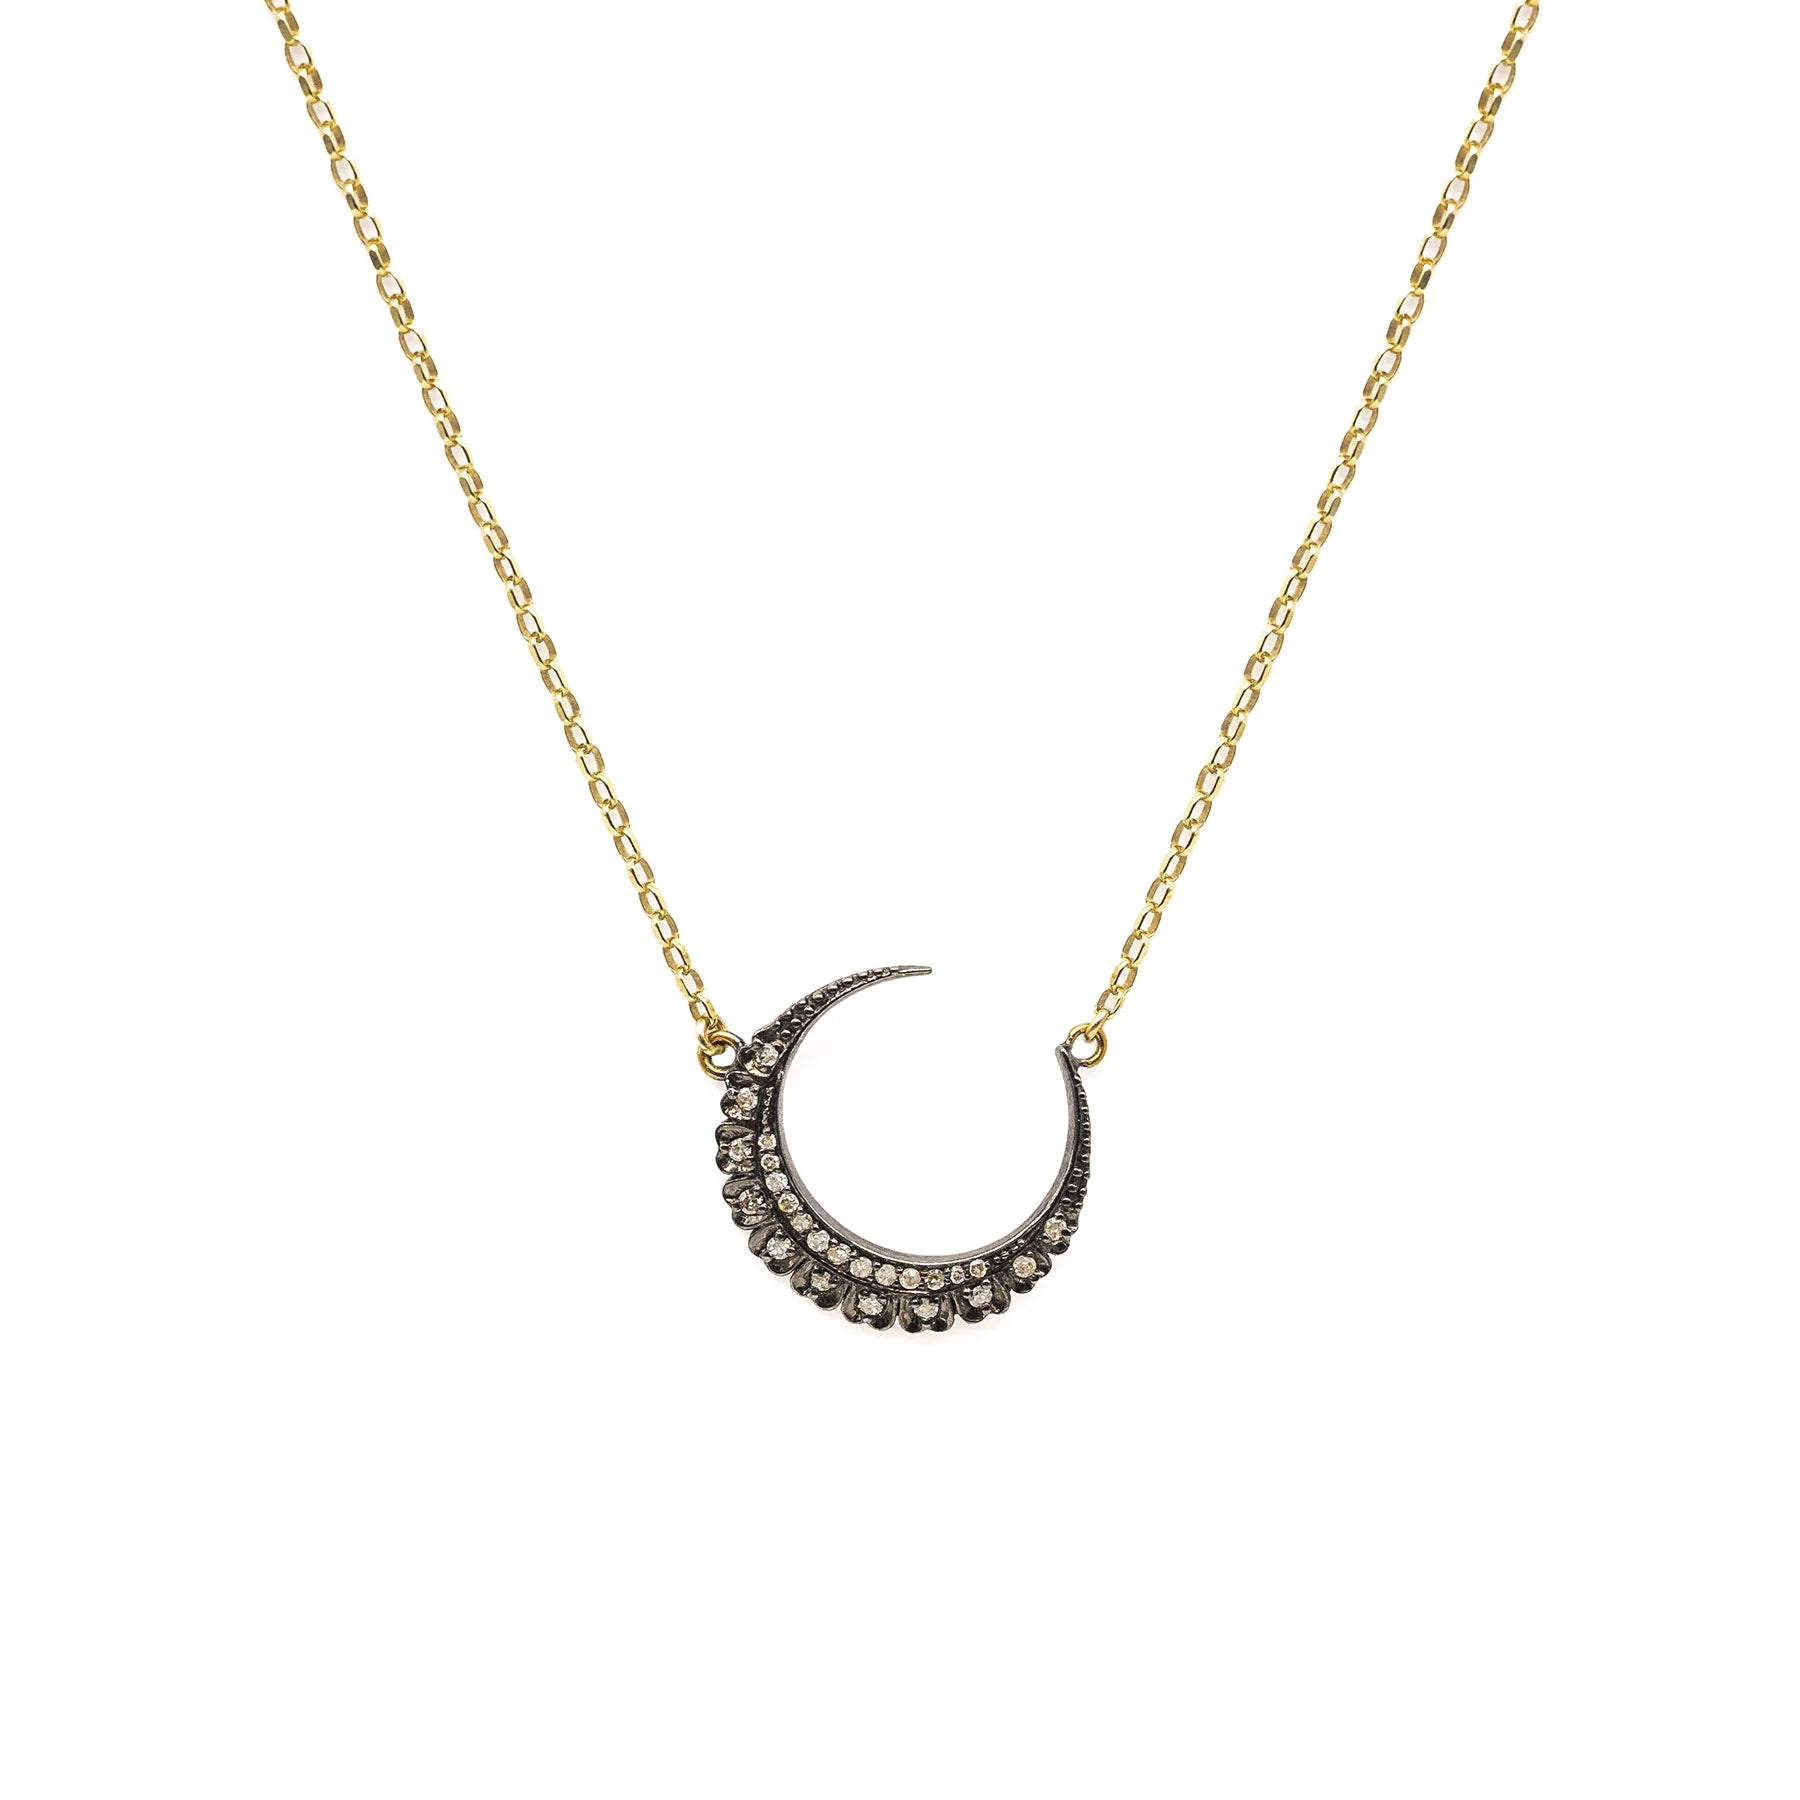 Pave diamond crescent necklace on a gold plated sterling silver chain